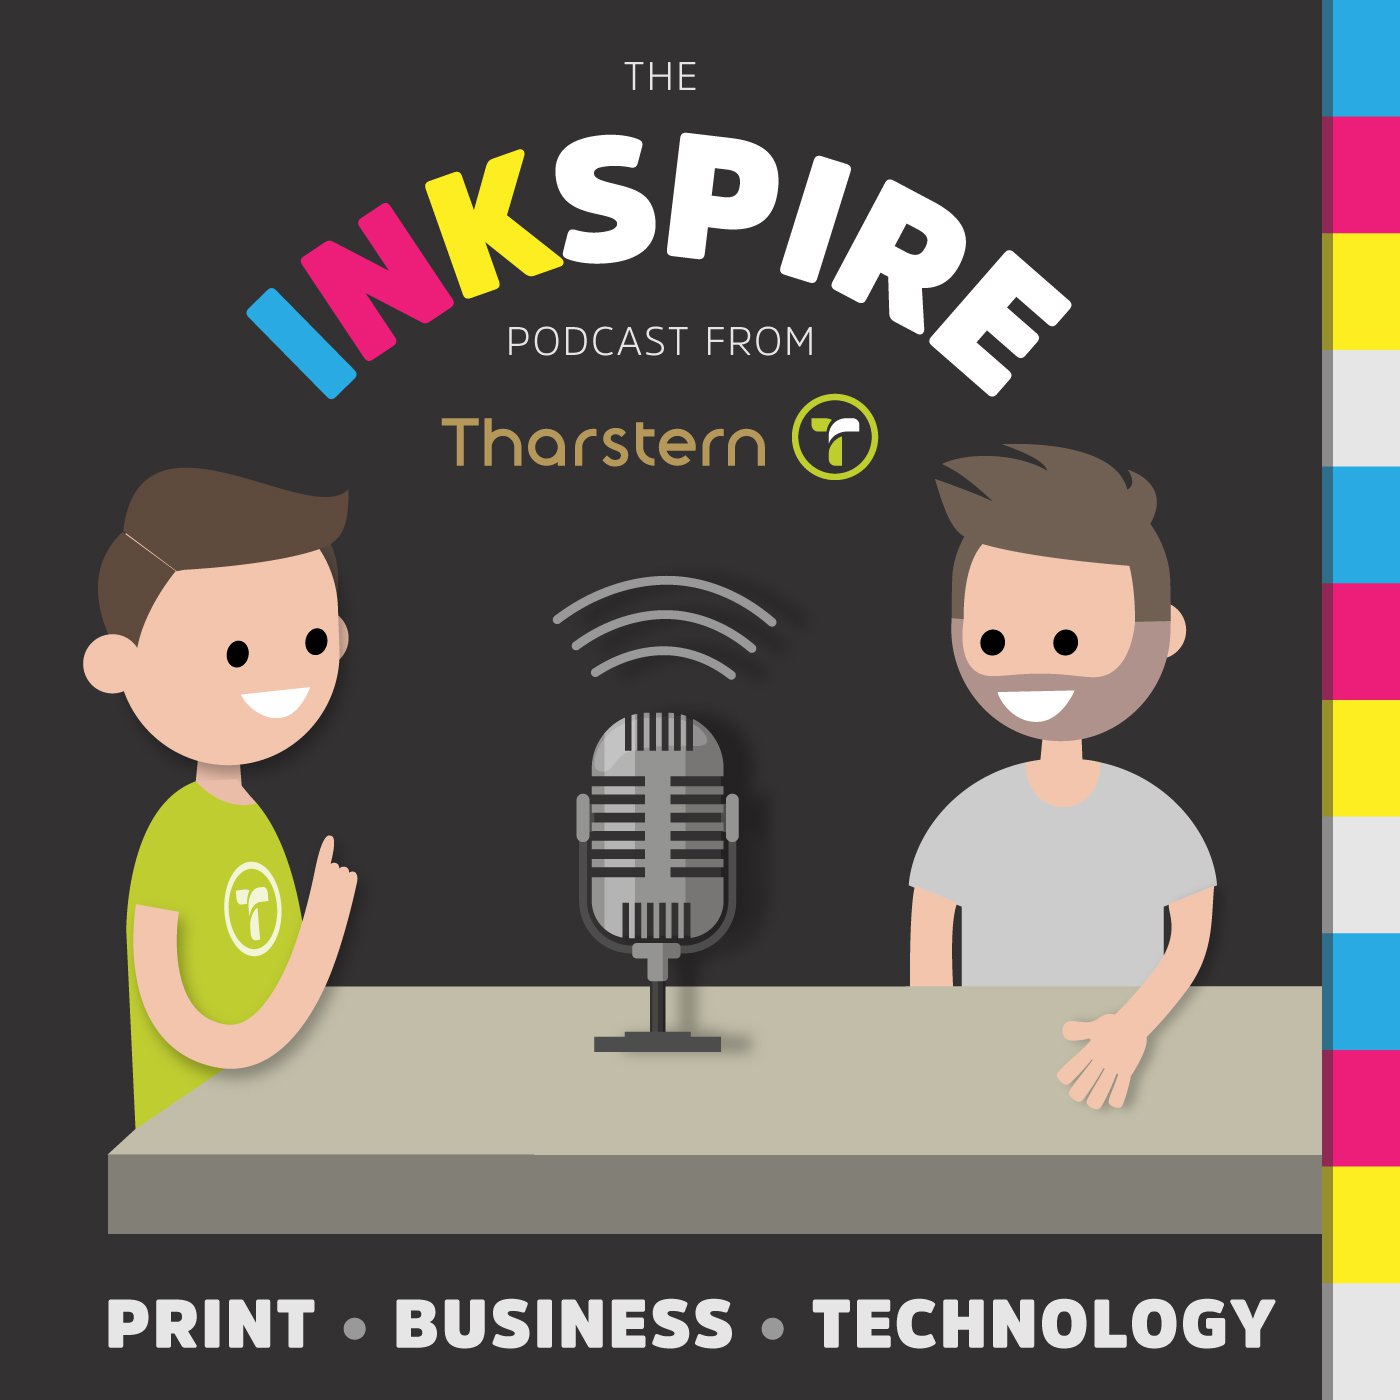 INKspire podcast from Tharstern